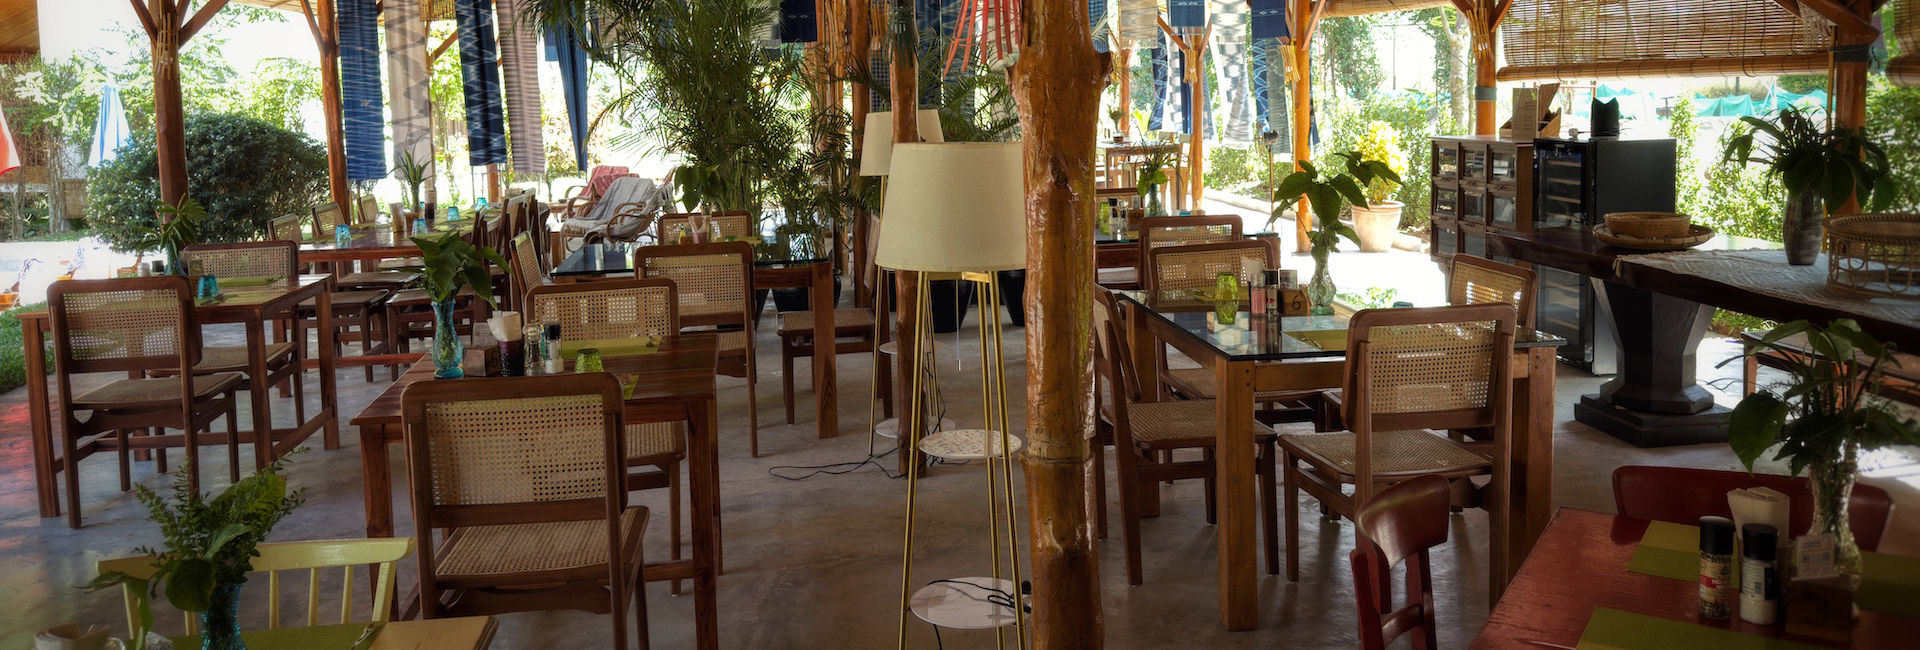 In the charming city of Luang Prabang, a cozy restaurant invites diners to relax at their well-appointed table and chairs.